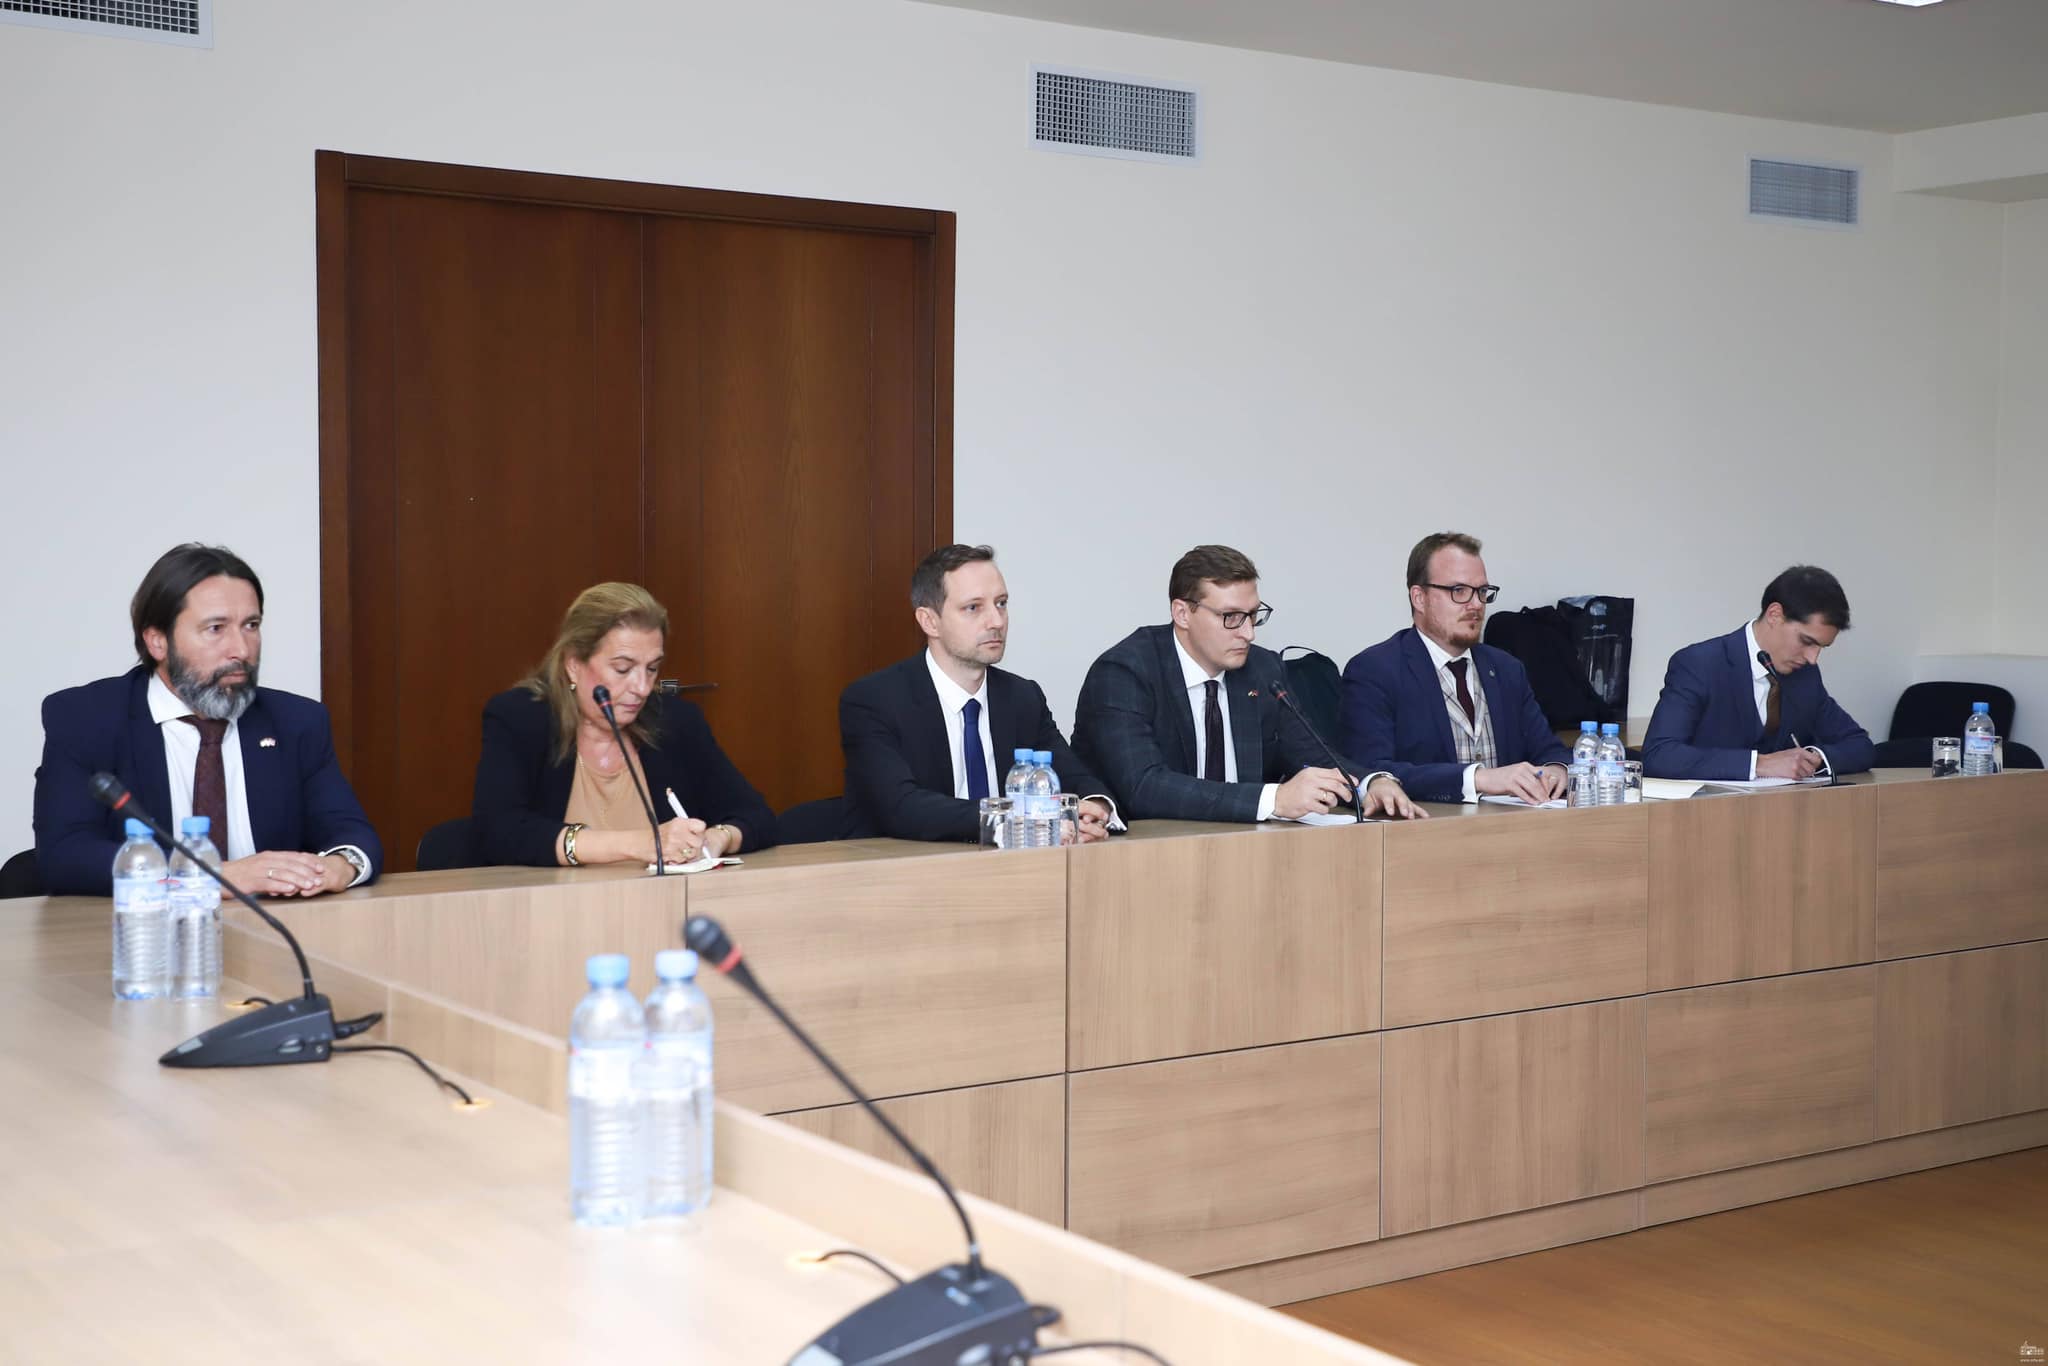 Deputy Foreign Minister of Armenia Paruyr Hovhannisyan received the Hungarian delegation led by Miklos Panyi, the Deputy Minister of the Hungarian Prime Minister’s Office and Tristan Azbej, Secretary of State for the «‎Hungary Helps» Programme.